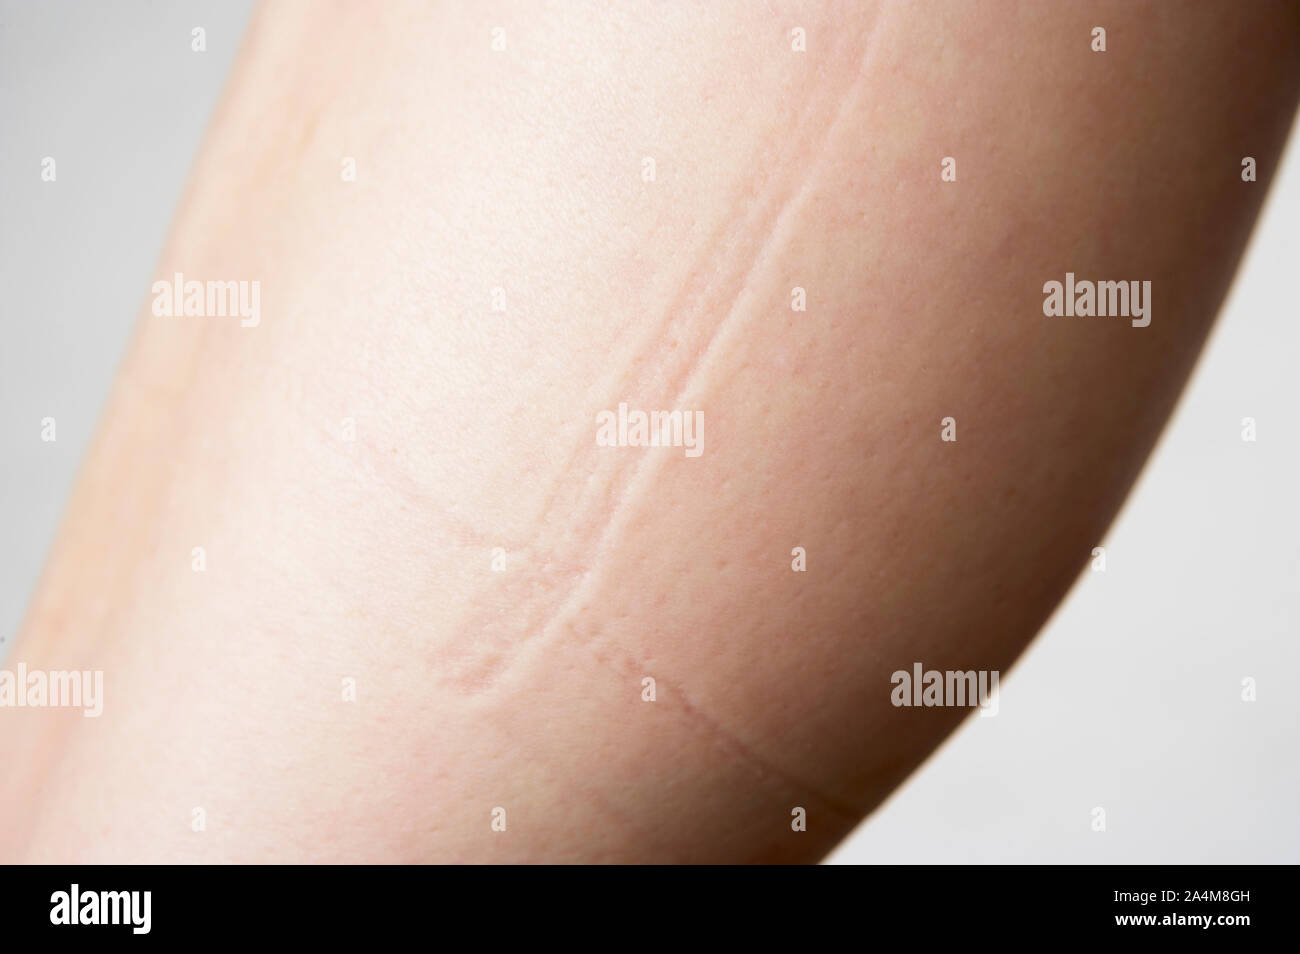 Woman's leg with marks from tight clothing Stock Photo